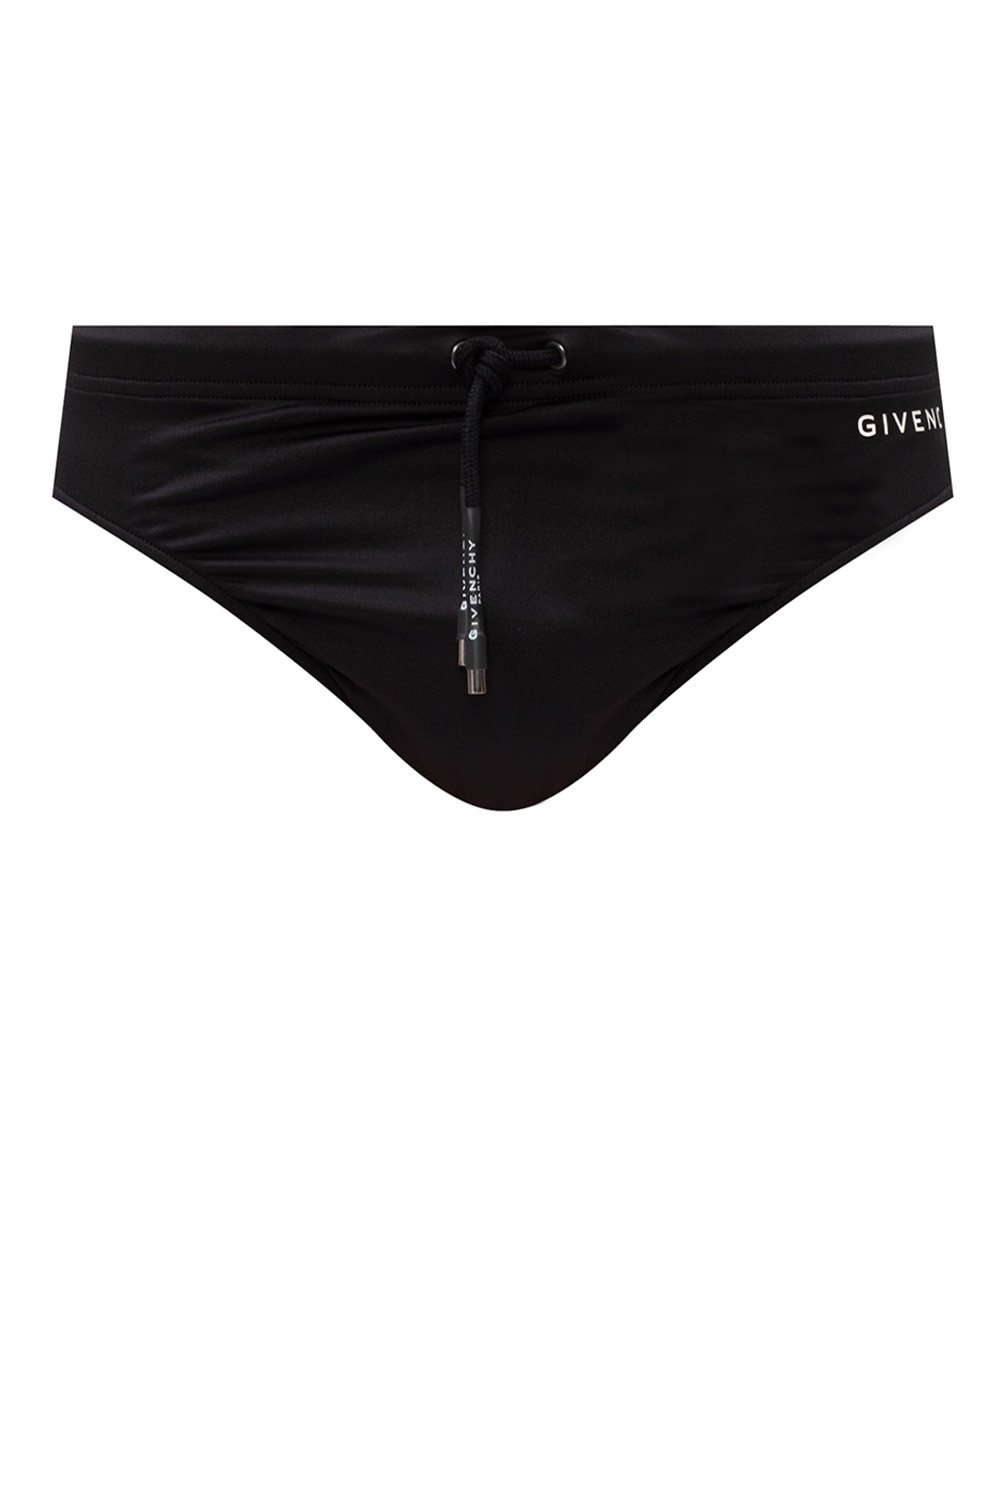 Total 57+ imagen givenchy briefs